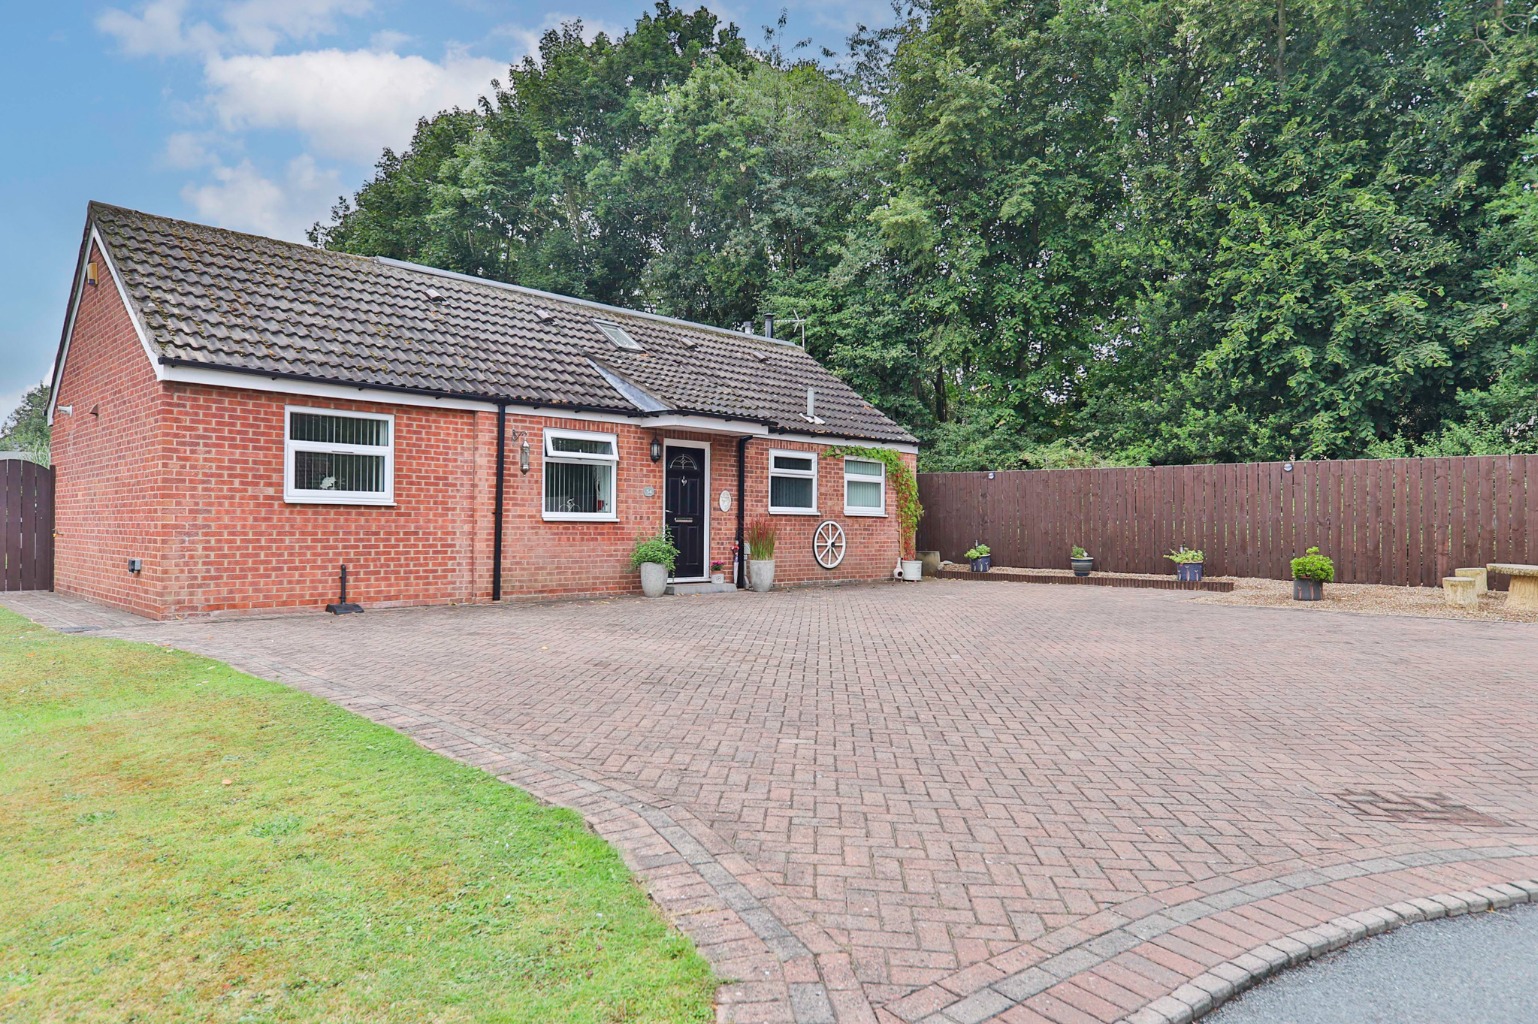 3 bed detached bungalow for sale - Property Image 1